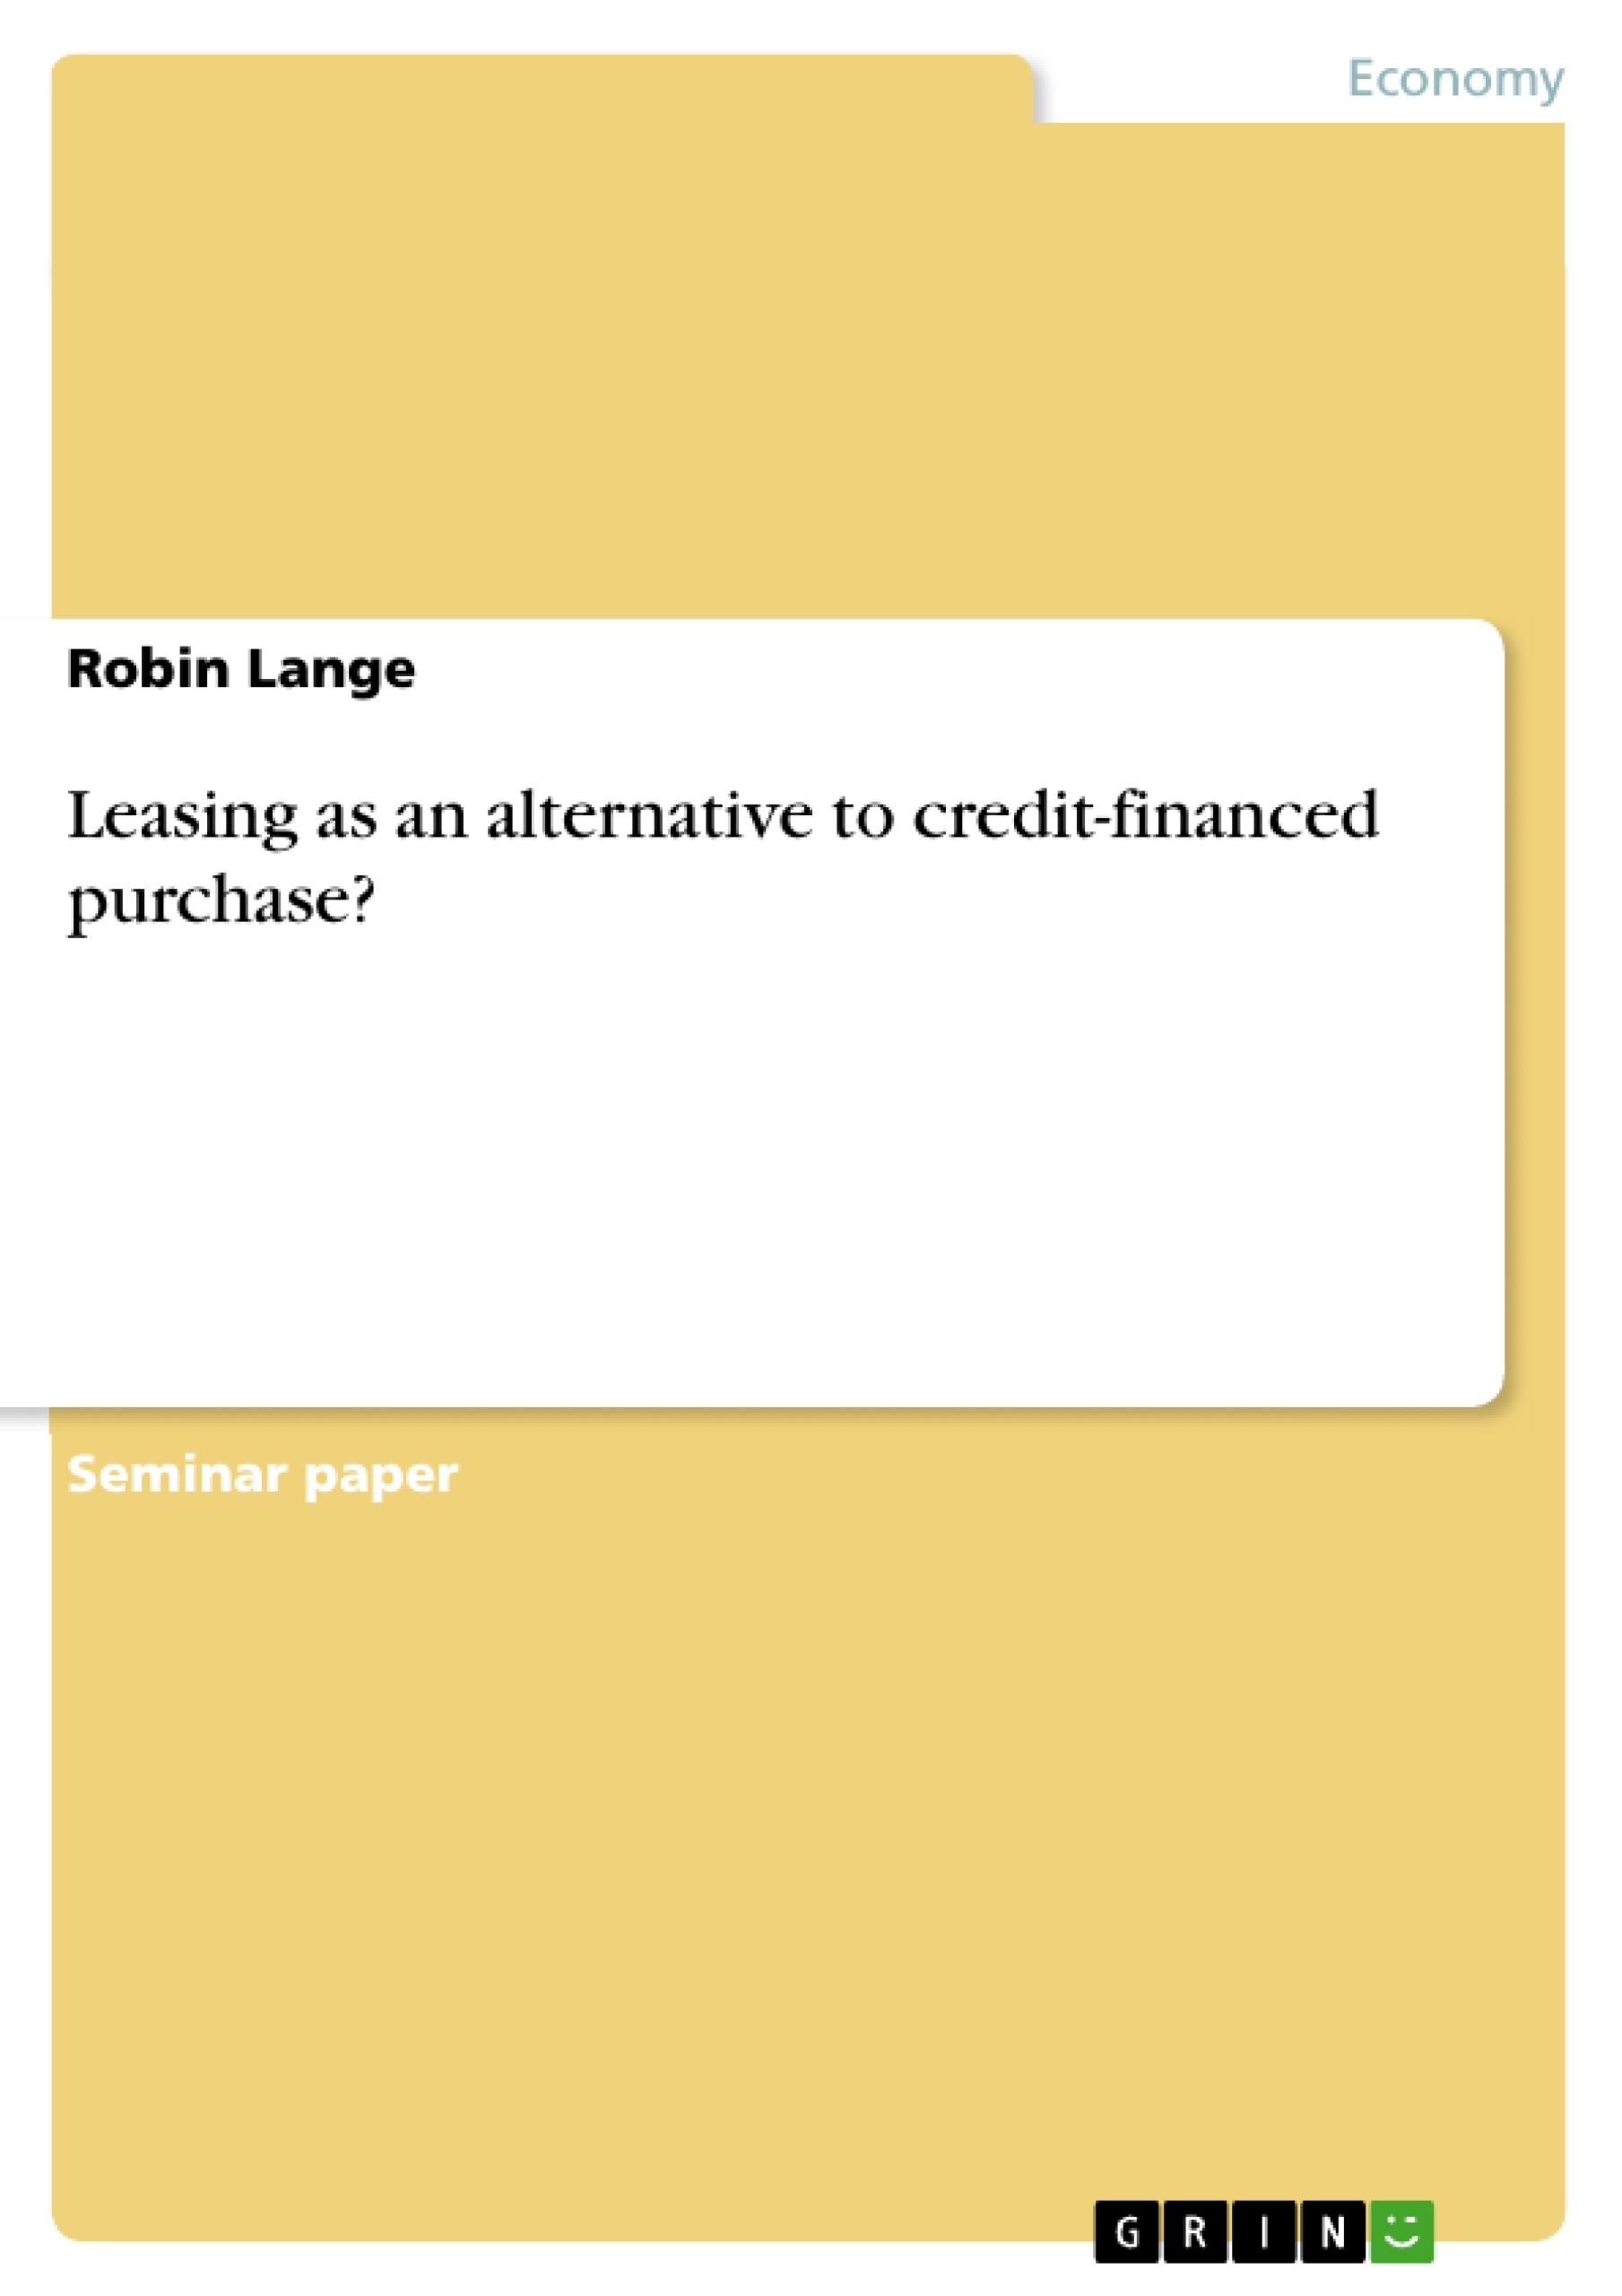 Title: Leasing as an alternative to credit-financed purchase?